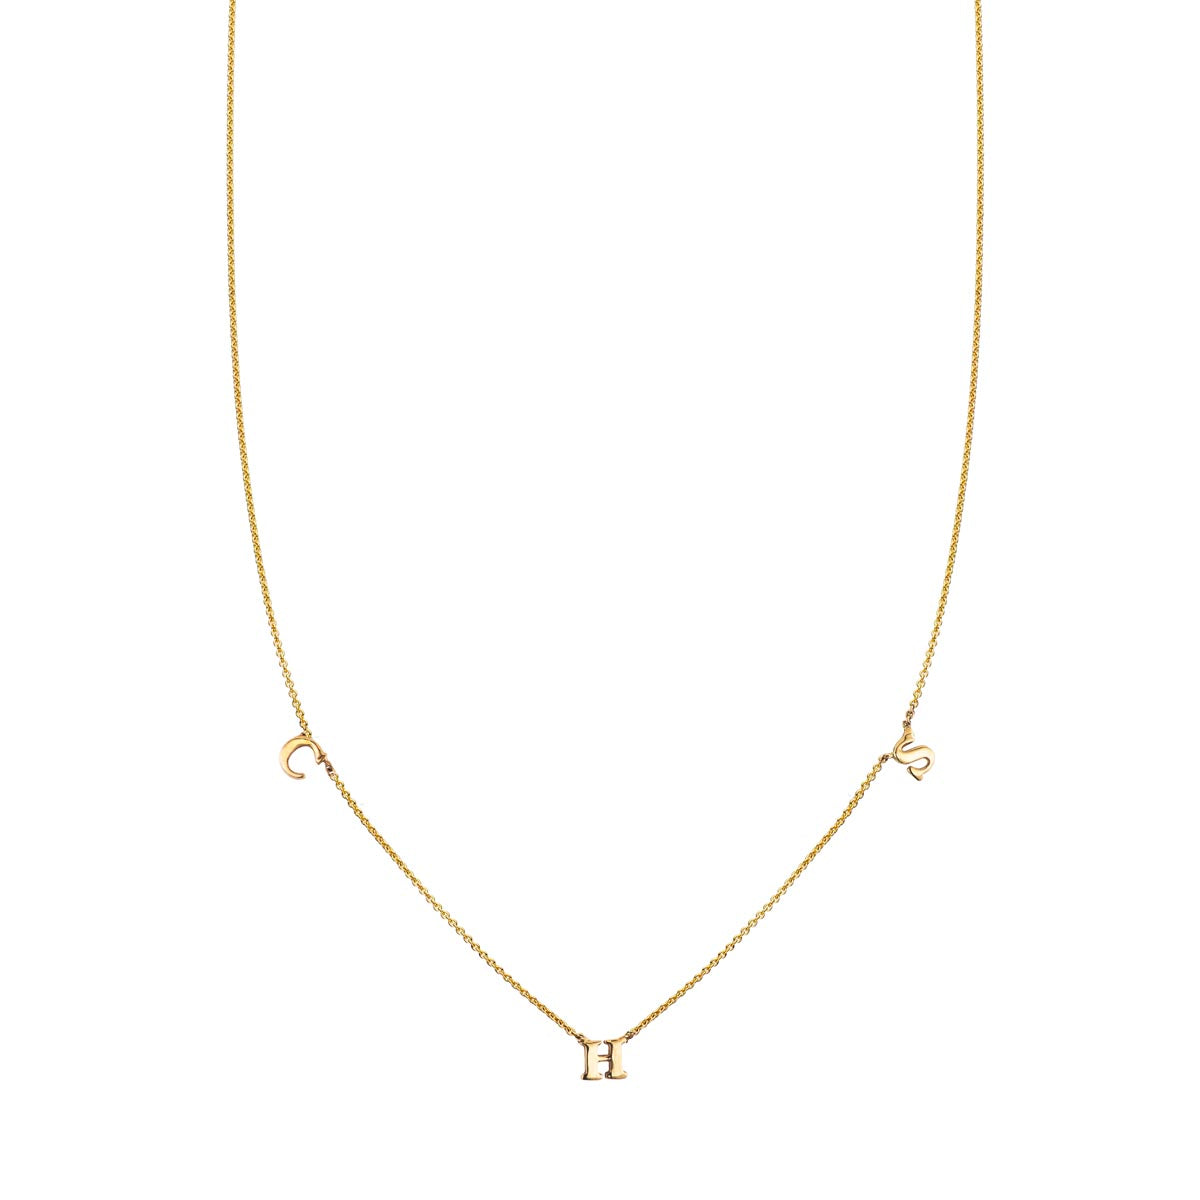 3 letter gold initial necklace PRN 464 14KY